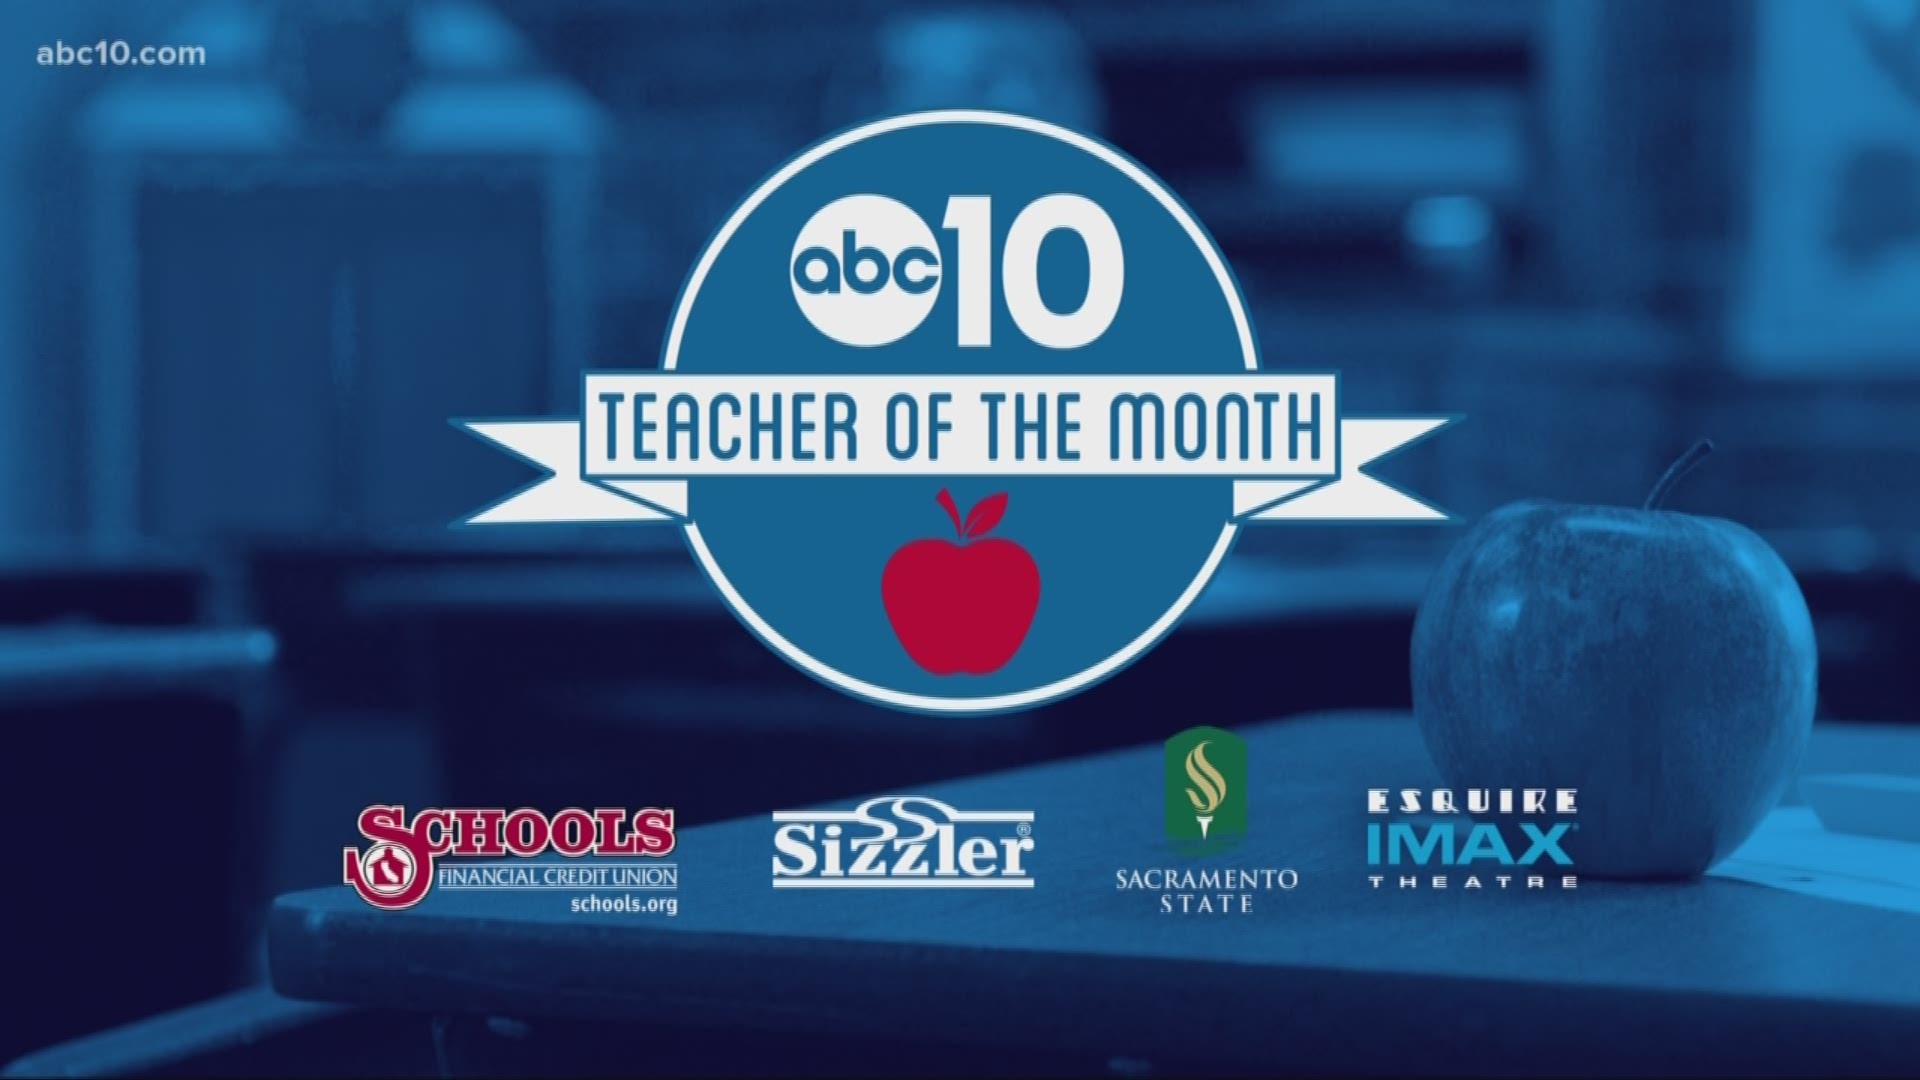 ABC10’s Teacher of the Month for June 2019 is Jerusha Cecil. She teaches eighth grade science, history and a medical detectives class at Creekview Ranch School in Roseville.